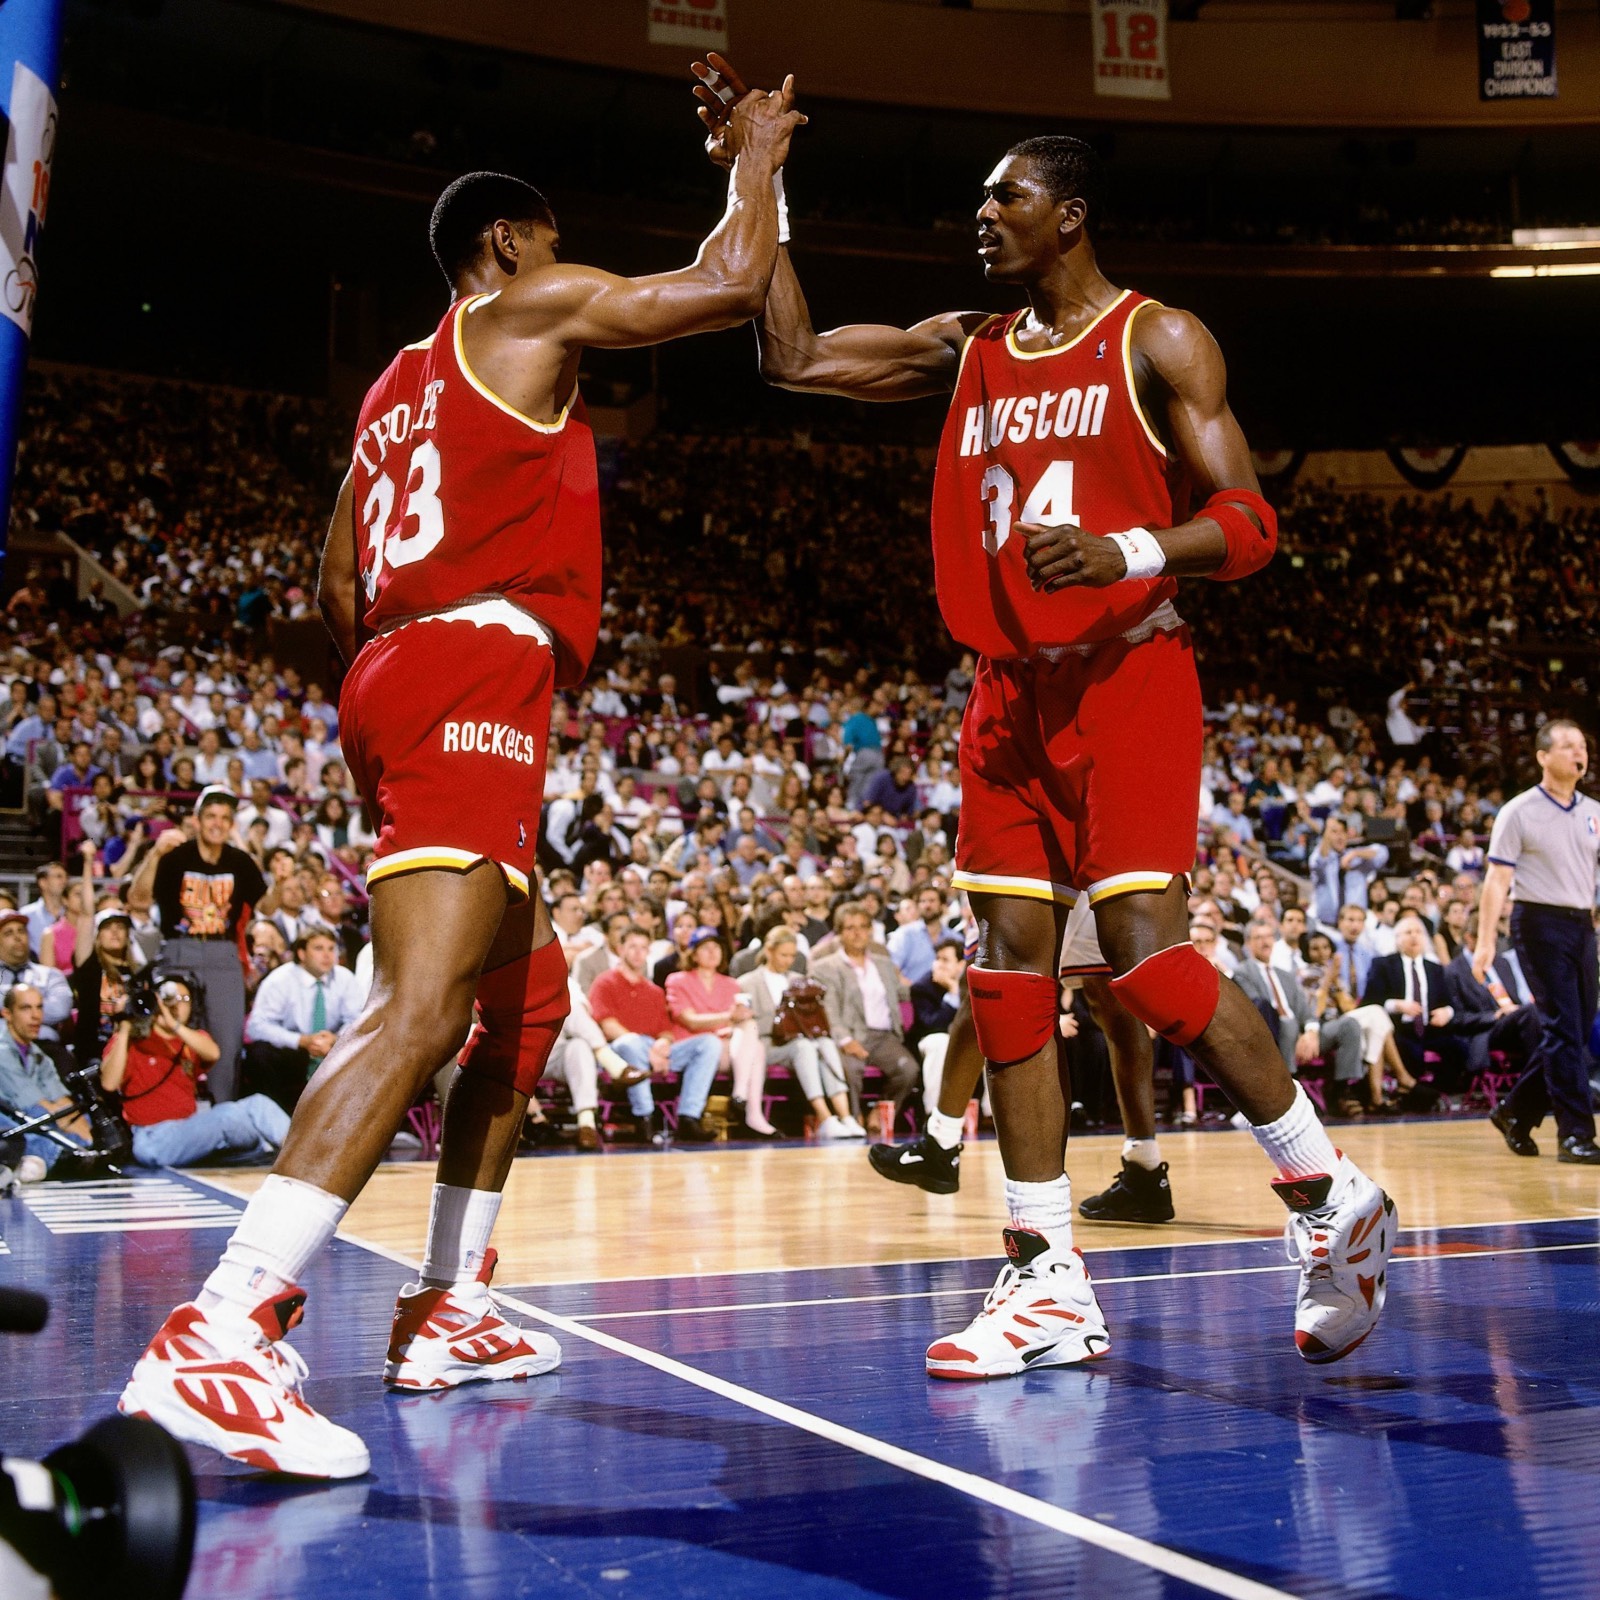 Hakeem Olajuwon #34 of the Houston Rockets high fives Otis Thorpe #33 during Game Four of the NBA Finals played on June 15, 1994 at Madison Square Garden in New York, New York. | (c) Andrew D. Bernstein/NBAE via Getty Images